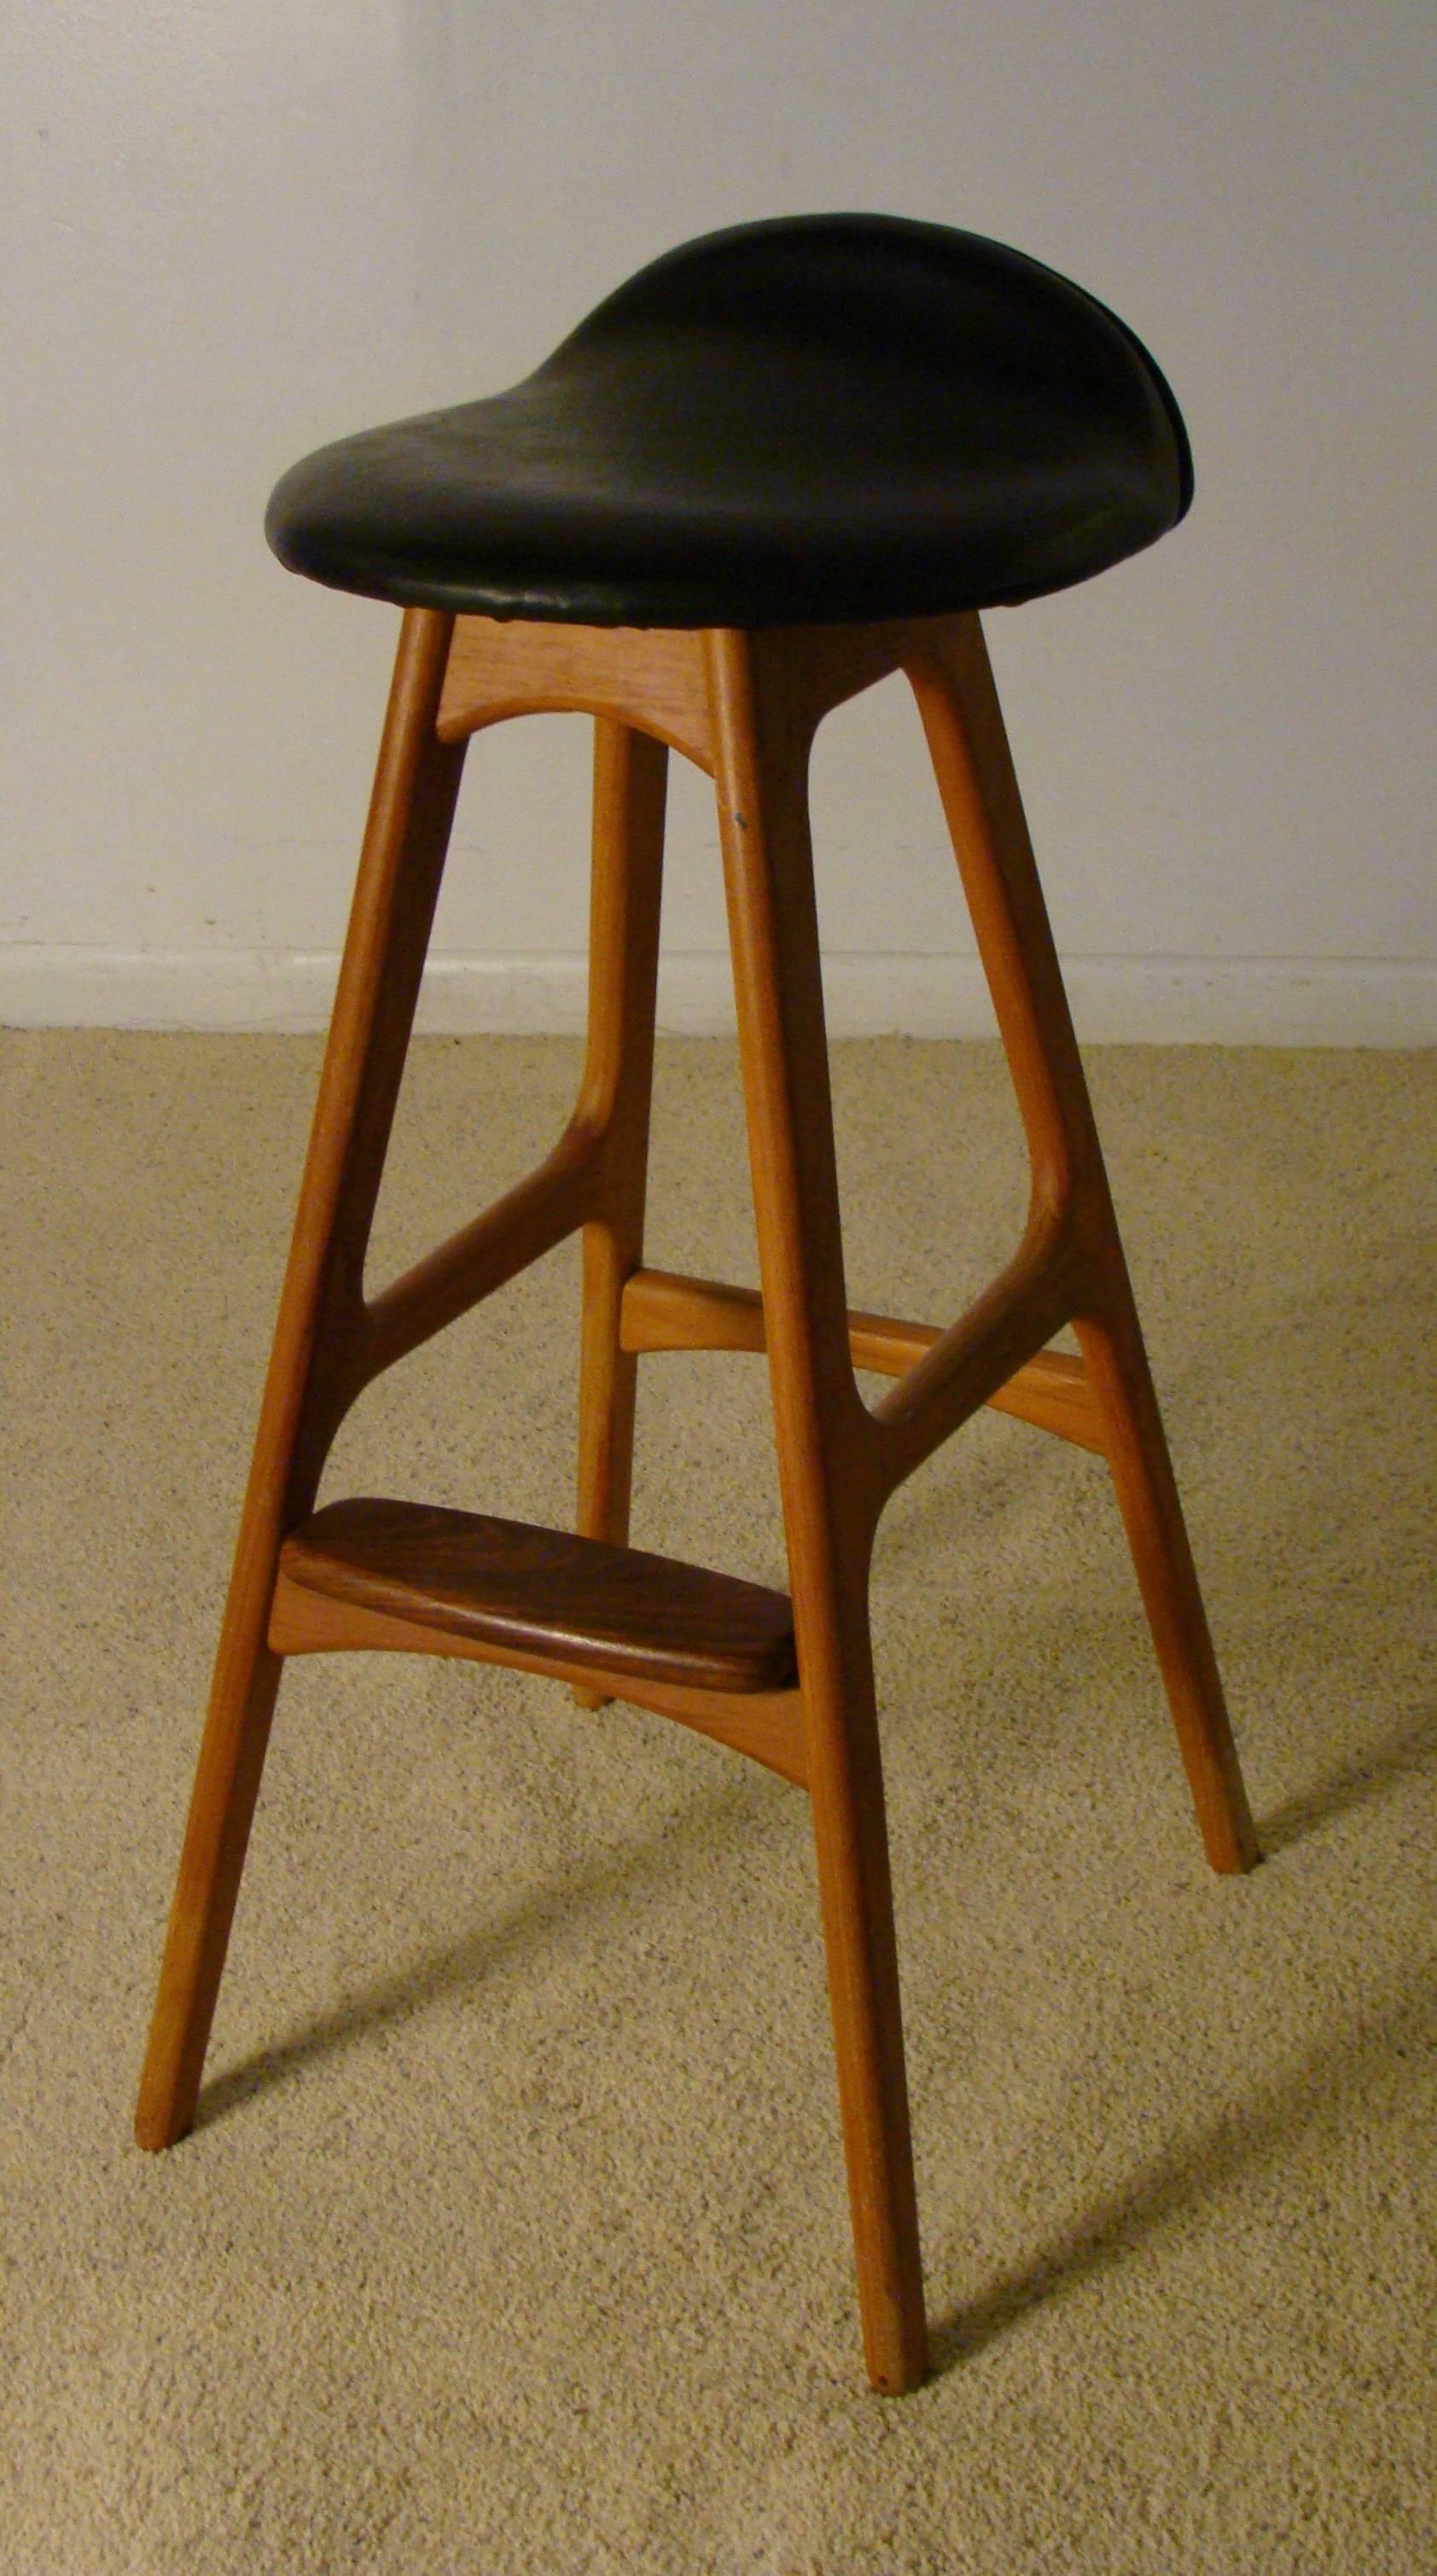 Sculptural pair of teak and rosewood Erik Buch bar stools for OD Mobler, Denmark. The body of the stool is teak and the footrest is rosewood.